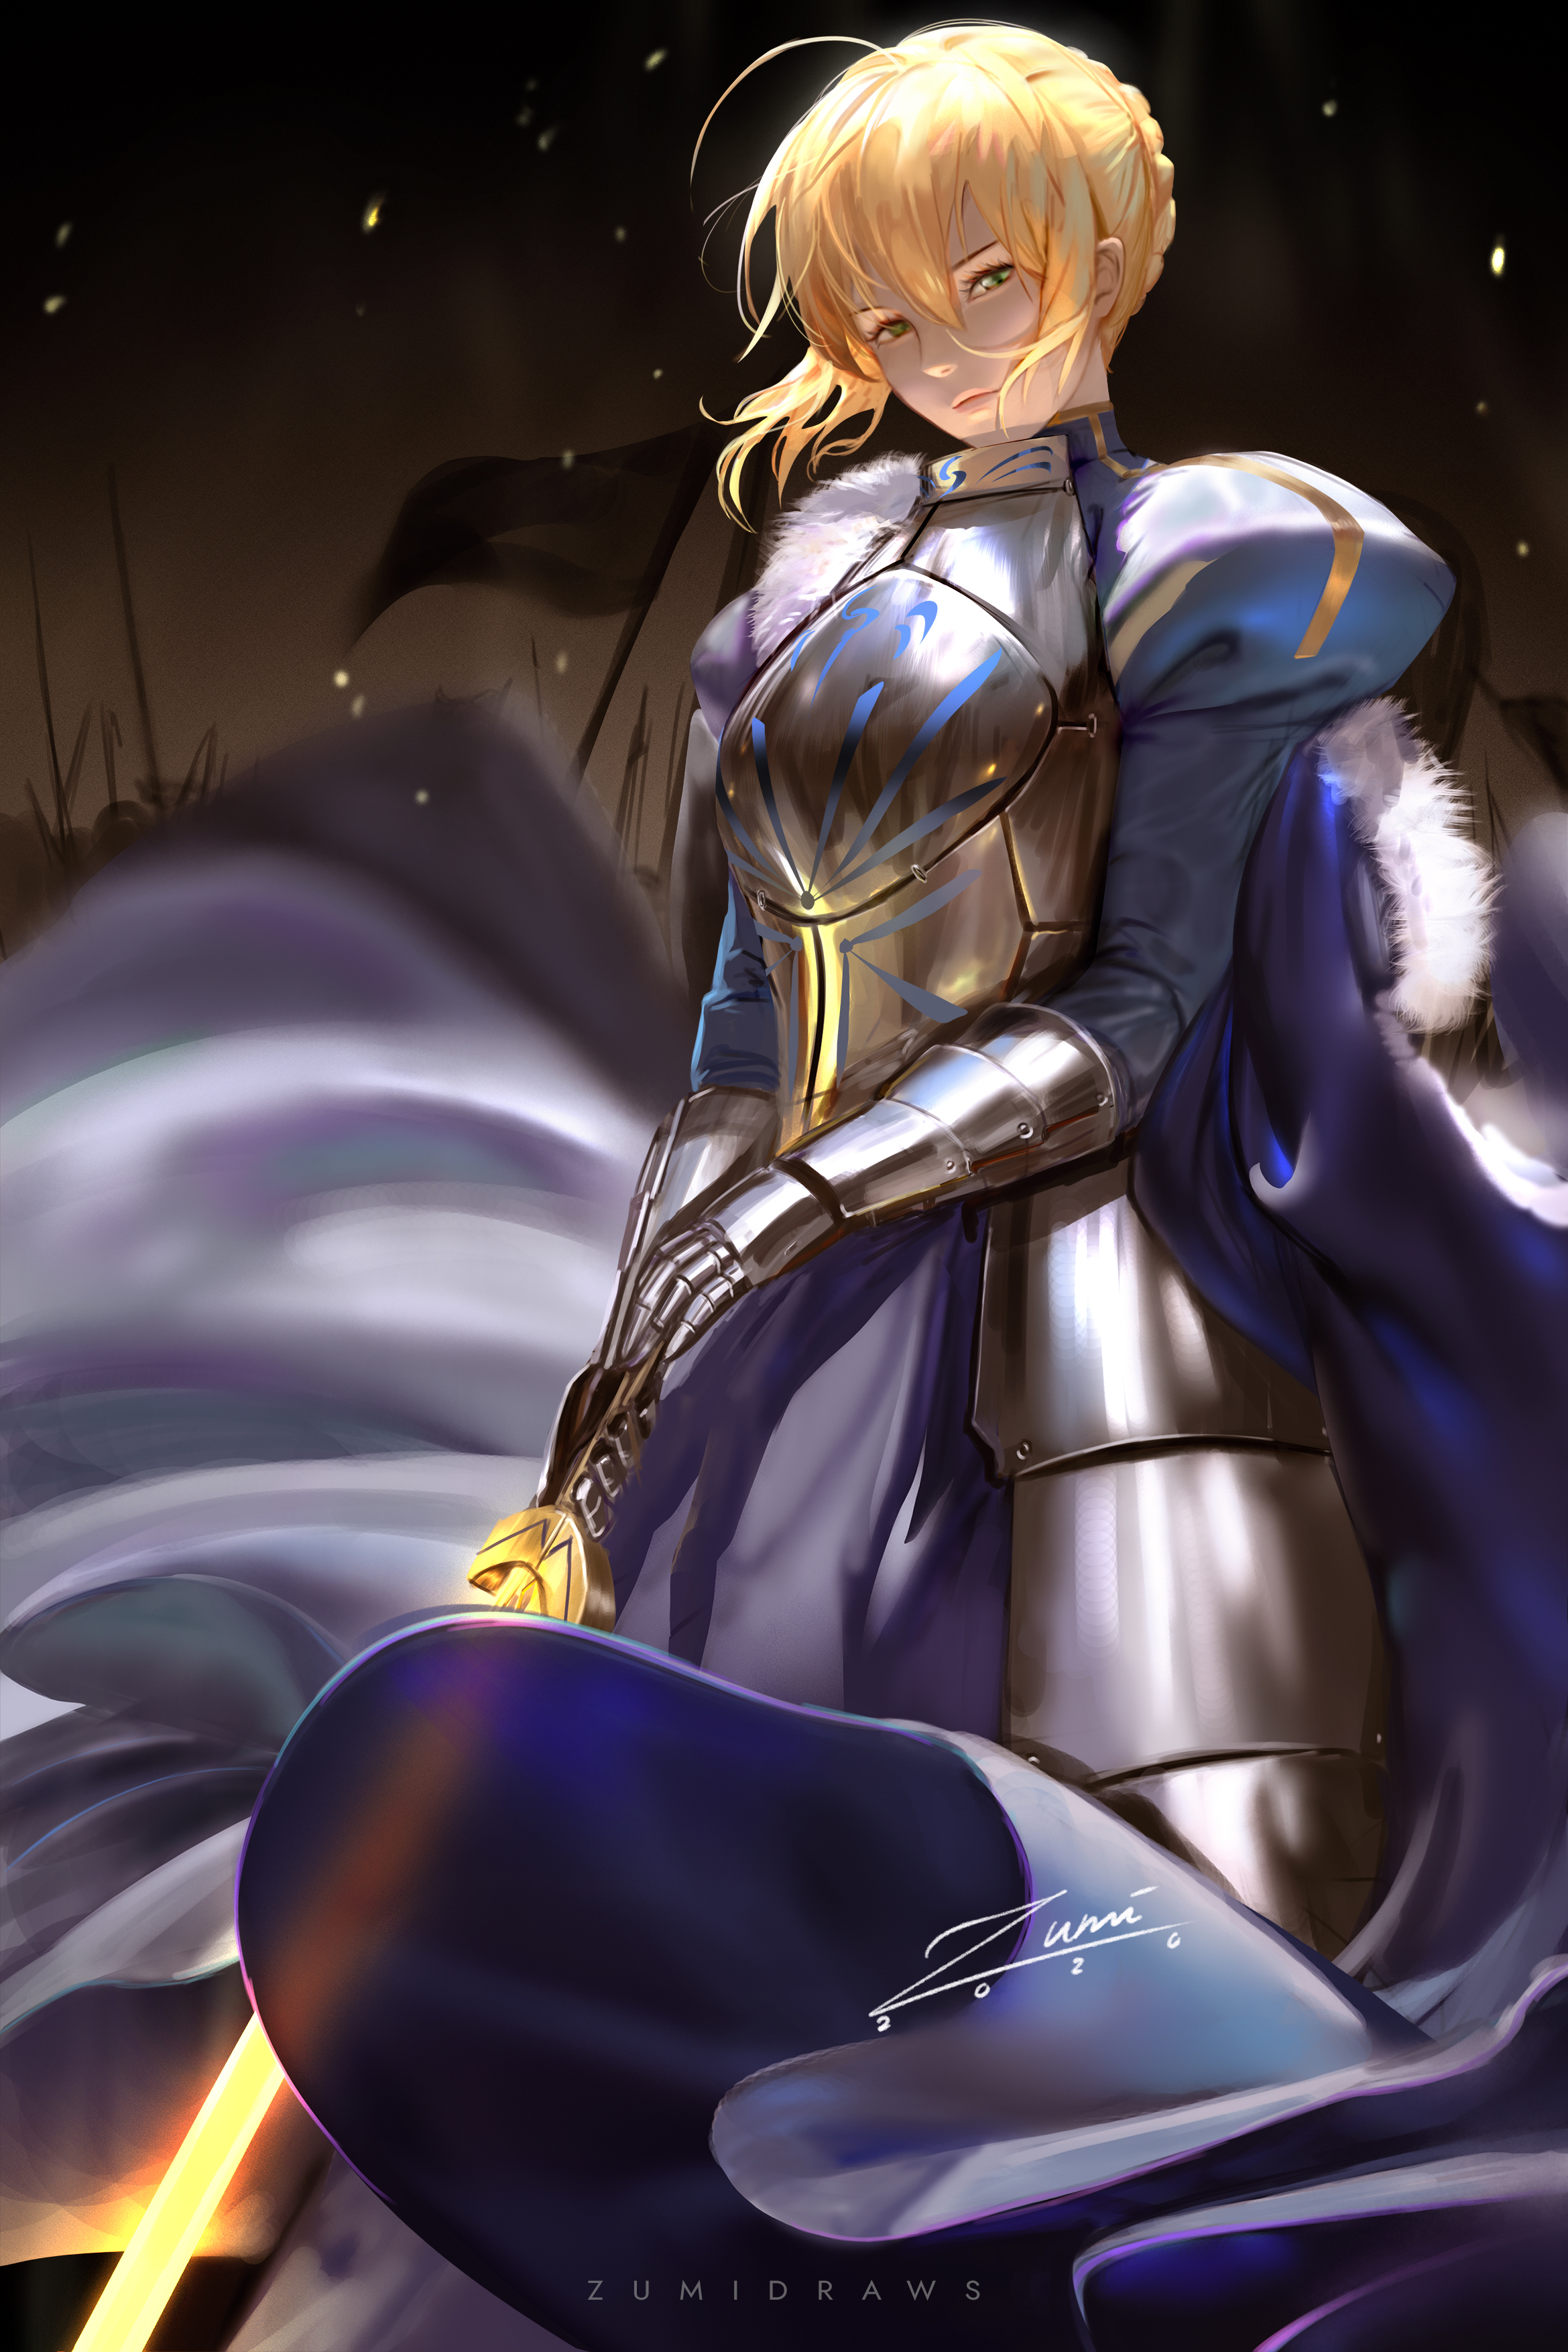 Saber Fate Series Anime Girls Fan Art Looking At Viewer Armor Arm Warmers Cape Glowing Vertical Artw 2339x3508